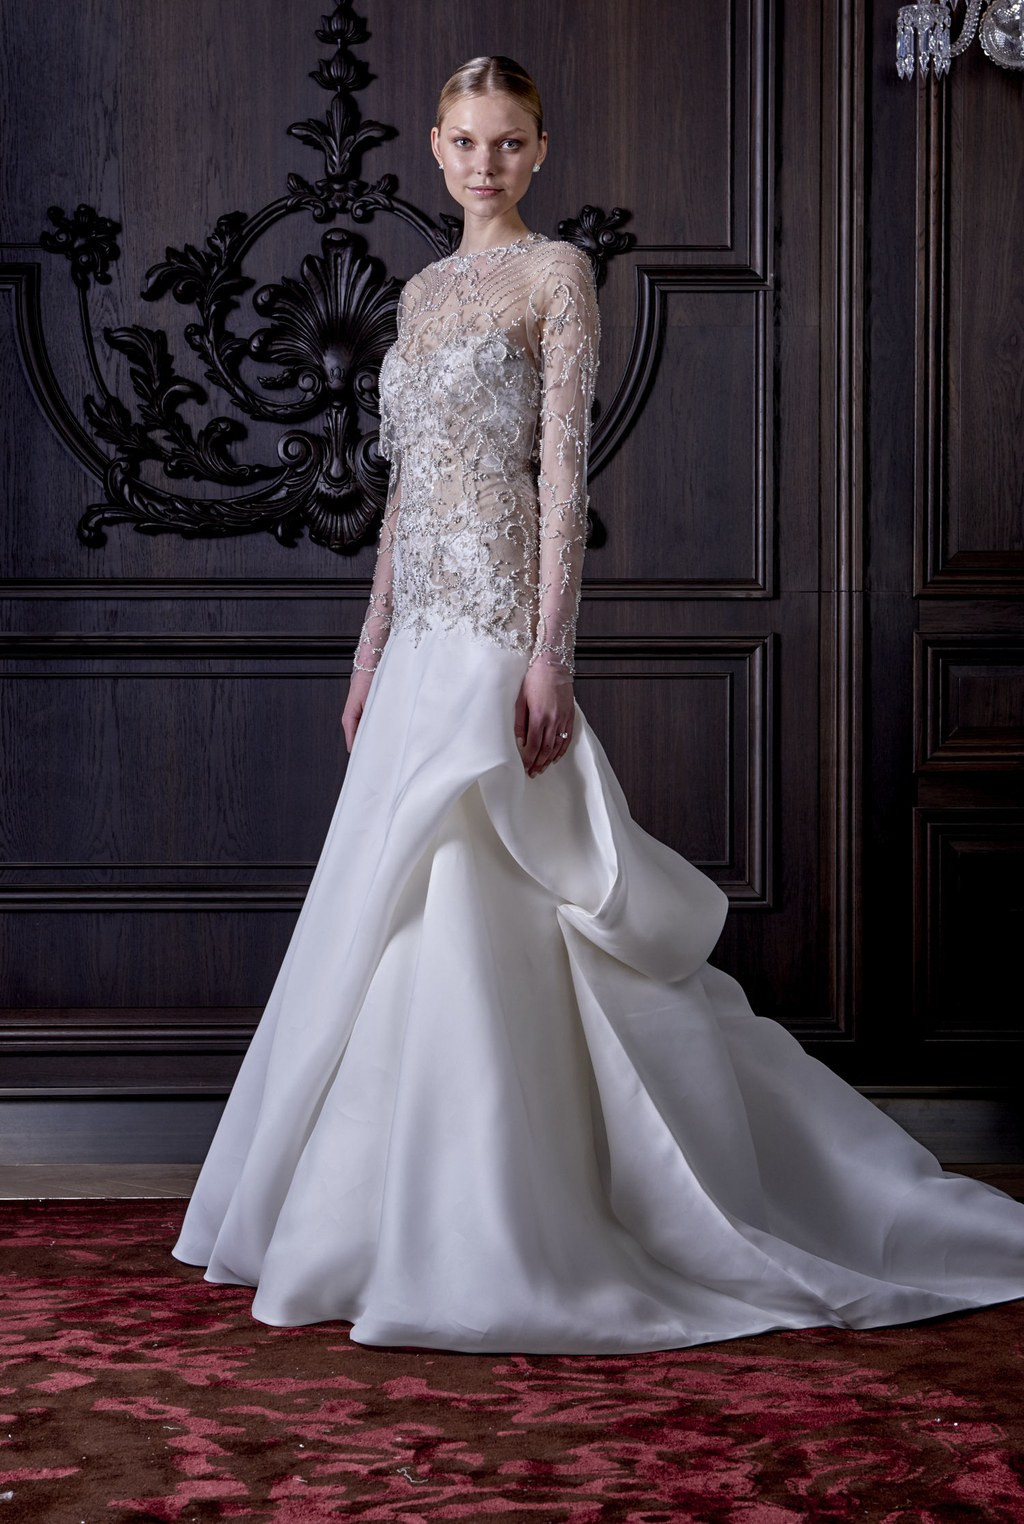 How Much Are Monique Lhuillier Wedding Gowns
 New Wedding Dresses Wedding Gowns Monique Lhuillier